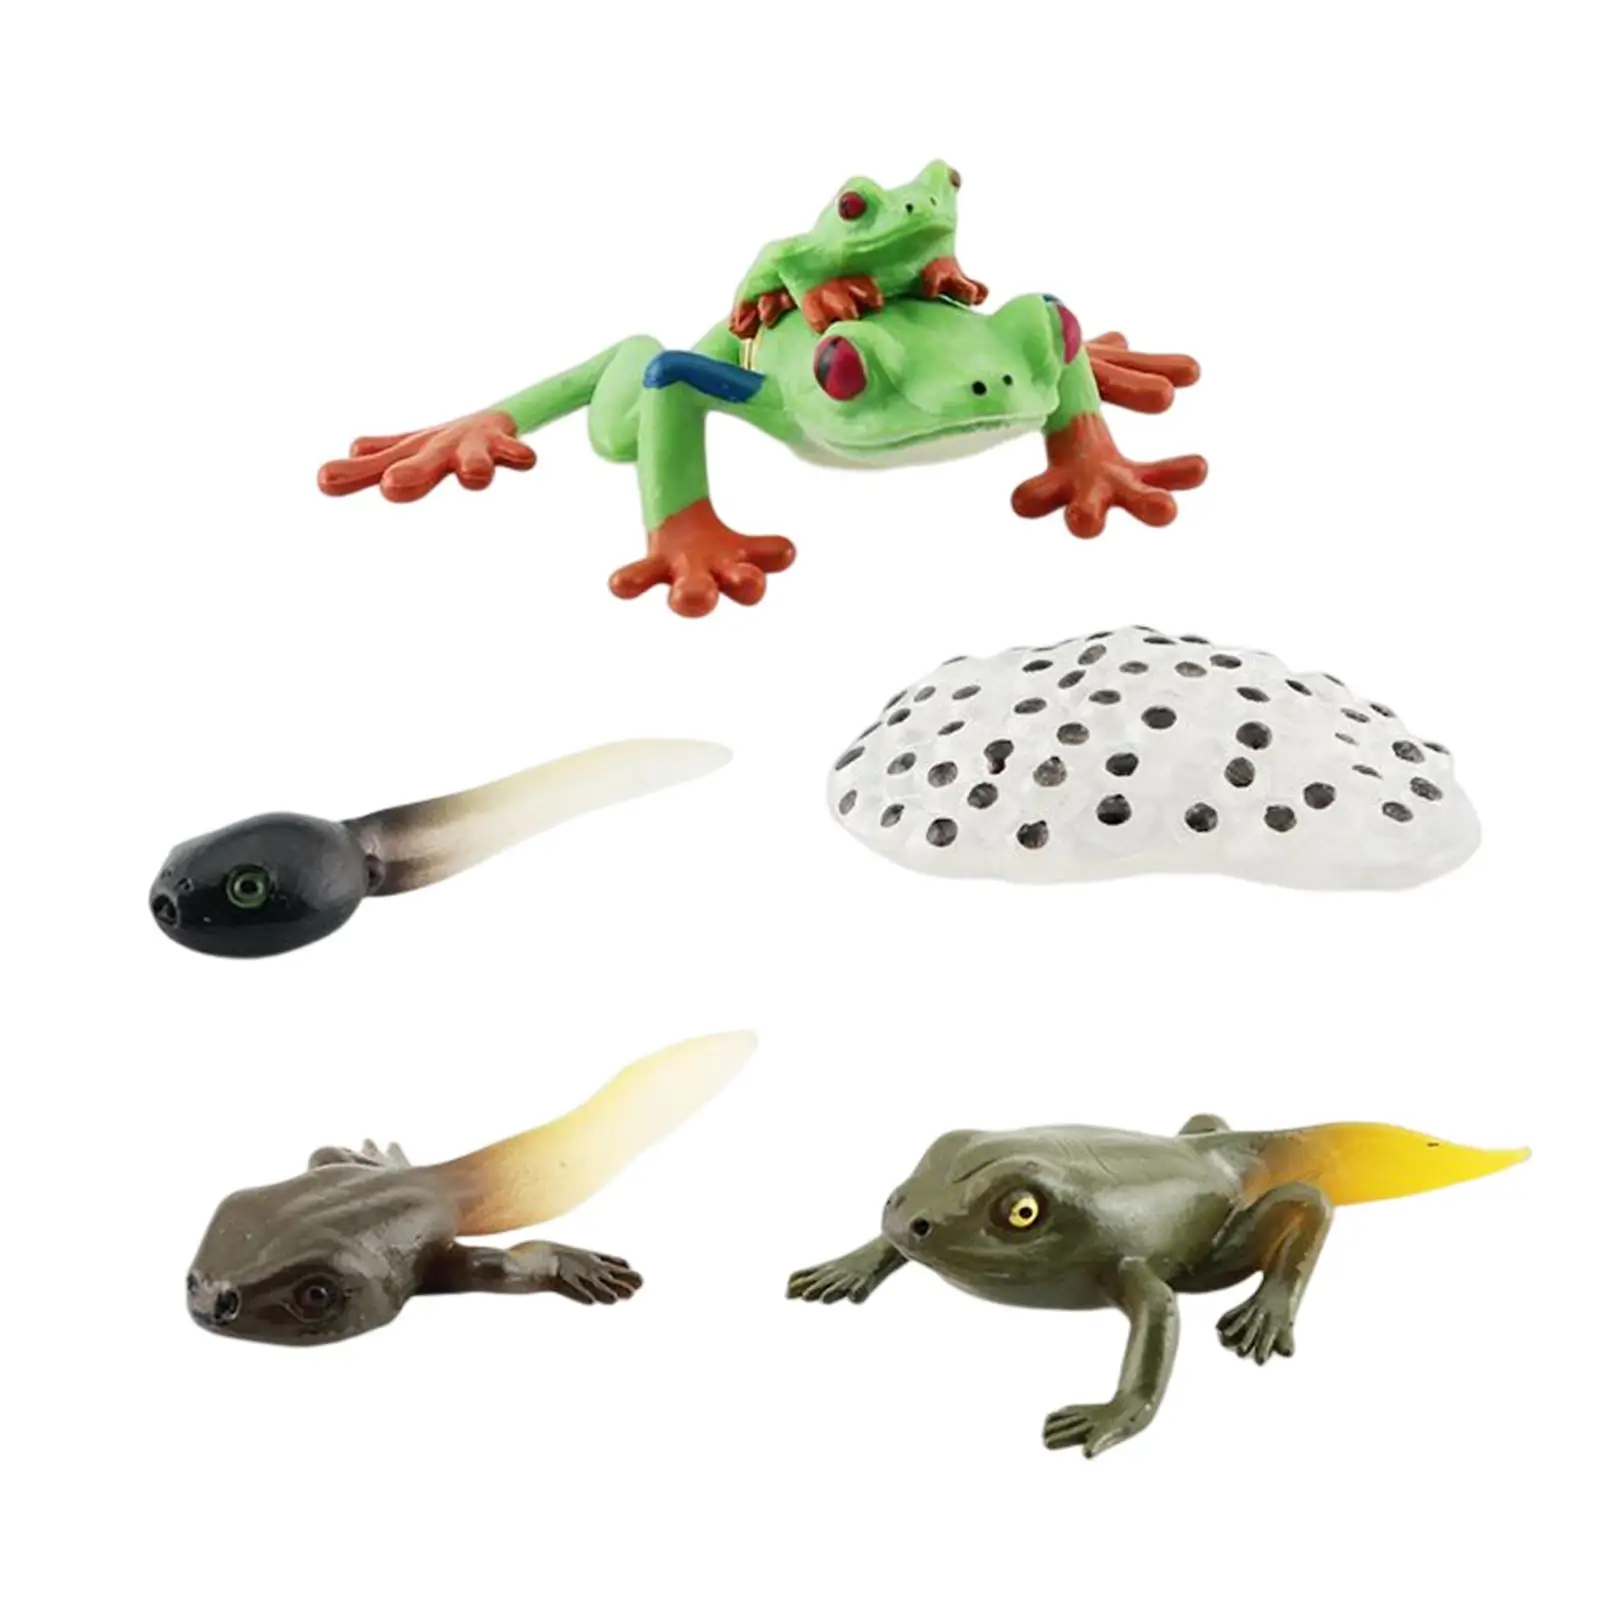 Frogs Life Cycle Model Realistic Animal Figurines for Children Toddlers Kids